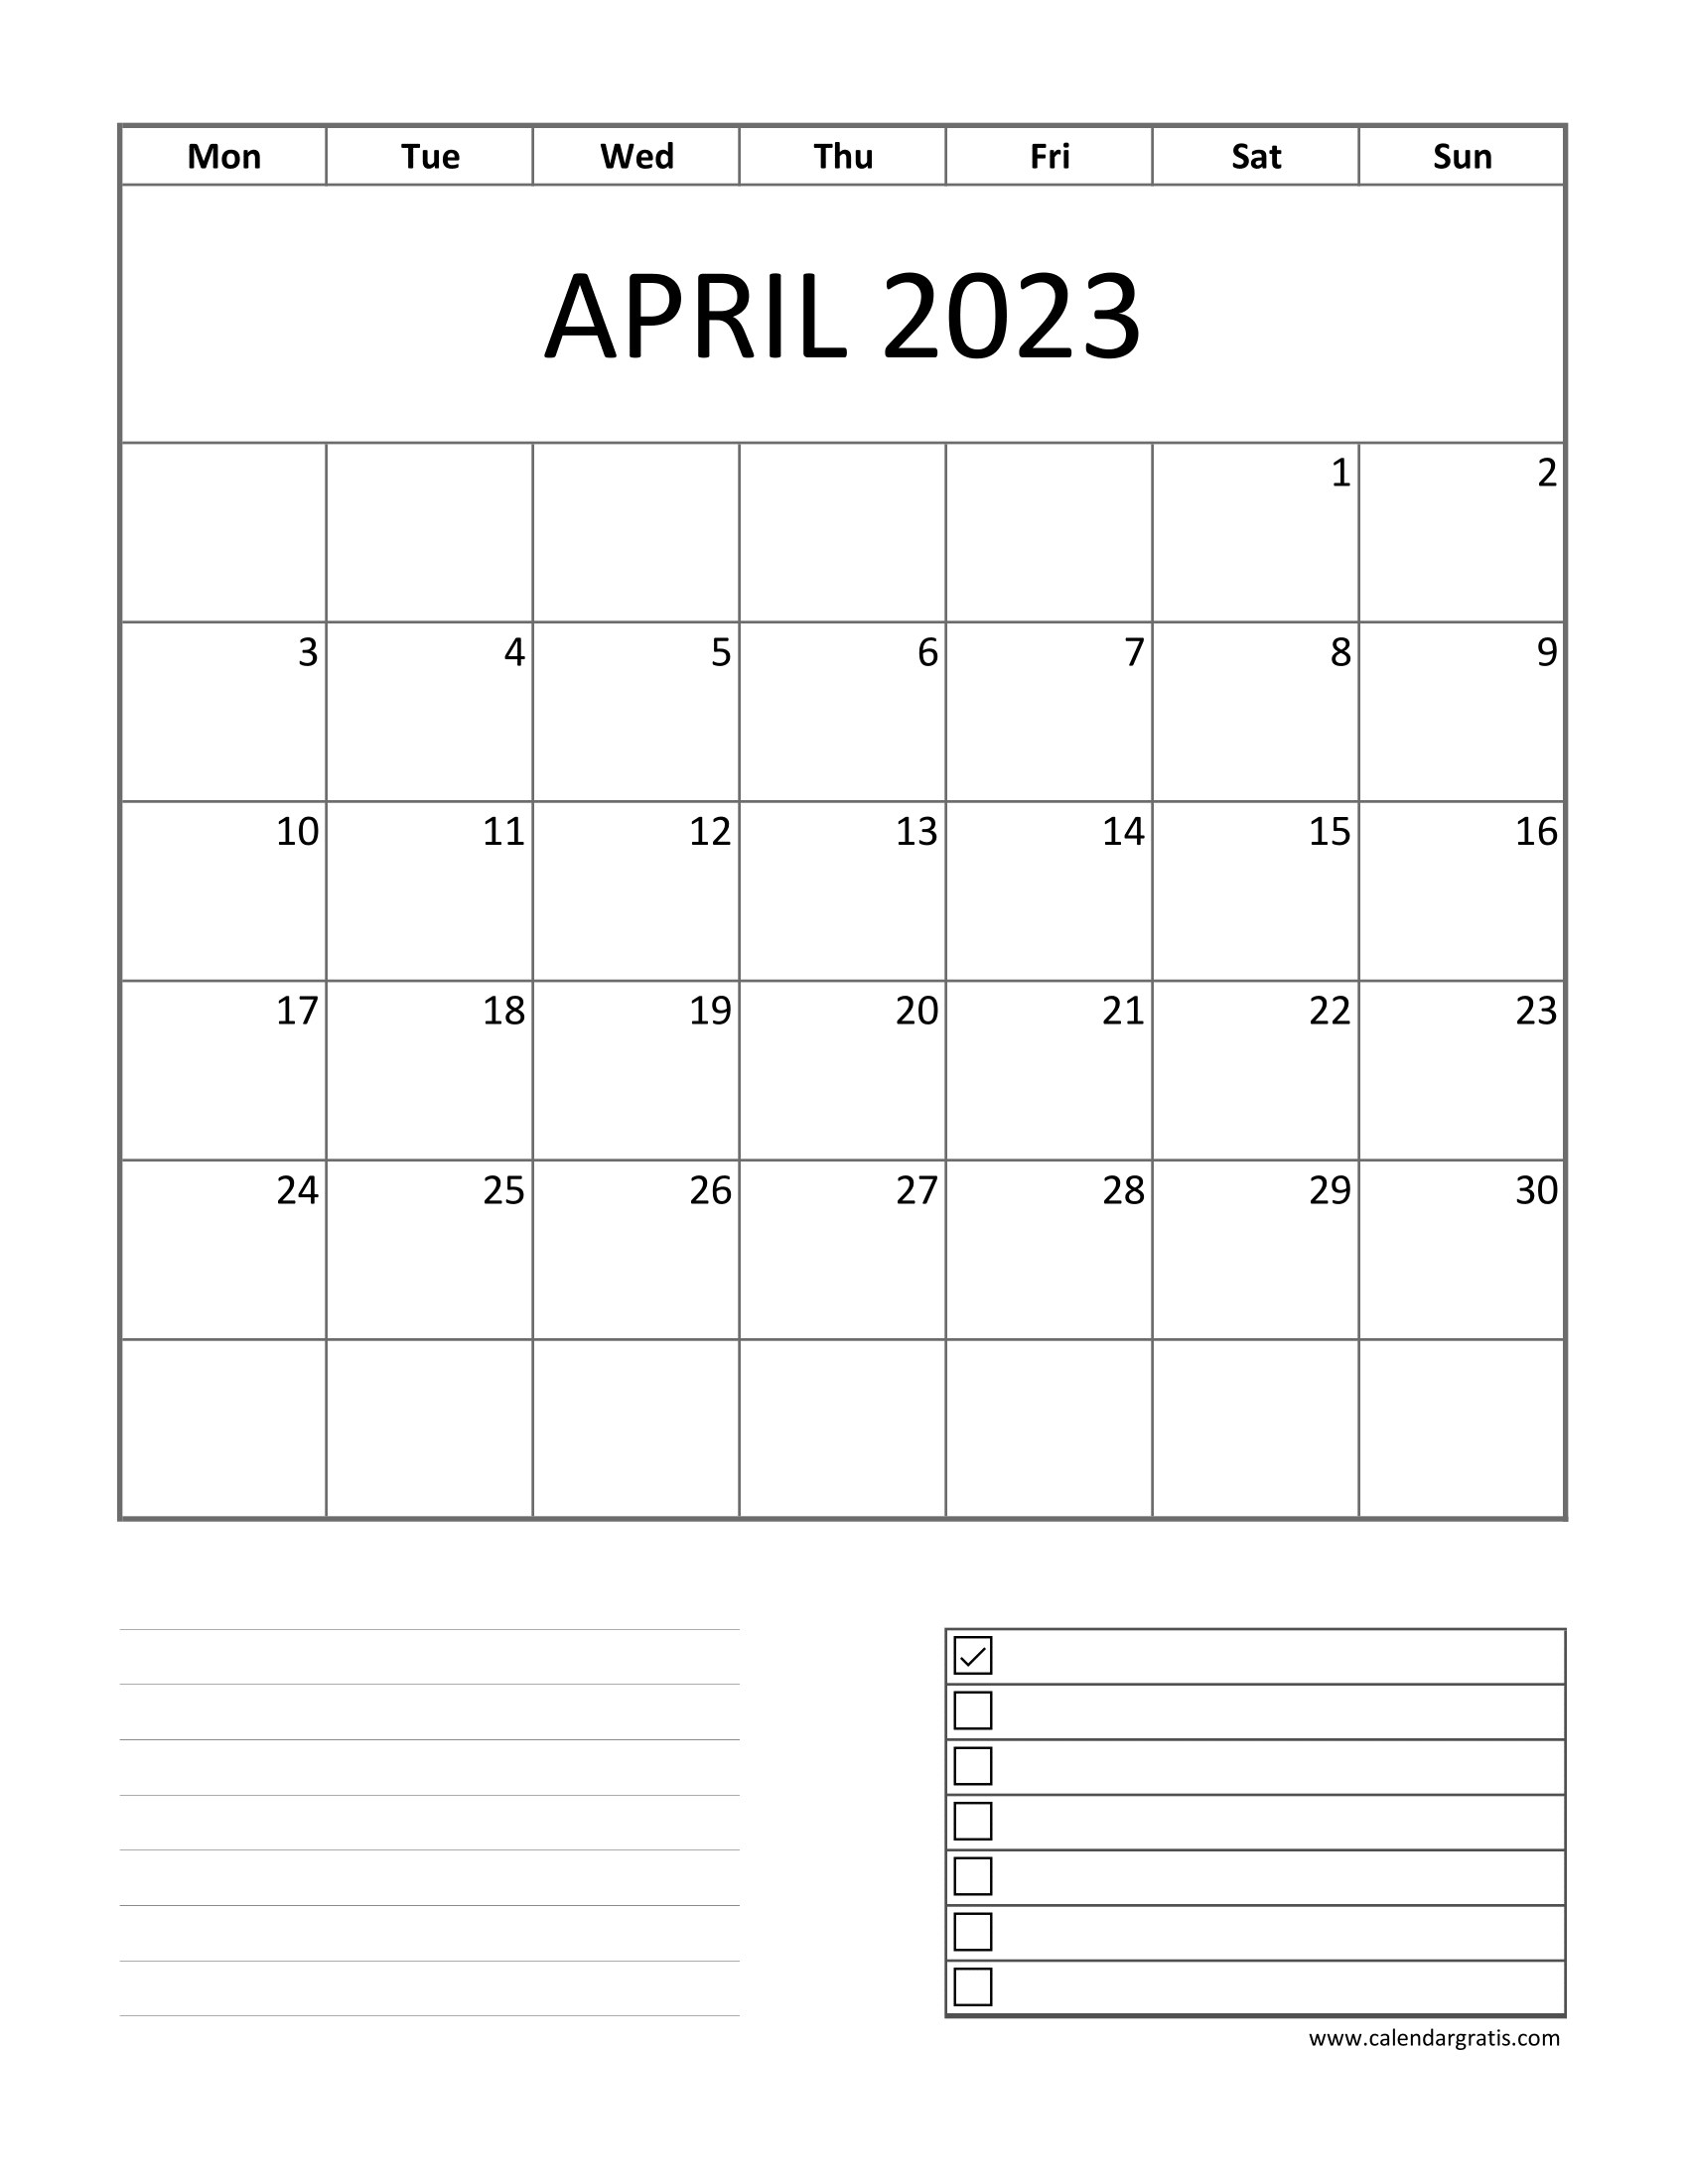 Printable Monday start calendar for April 2023 with notes section, lines, to-do list, checkboxes.